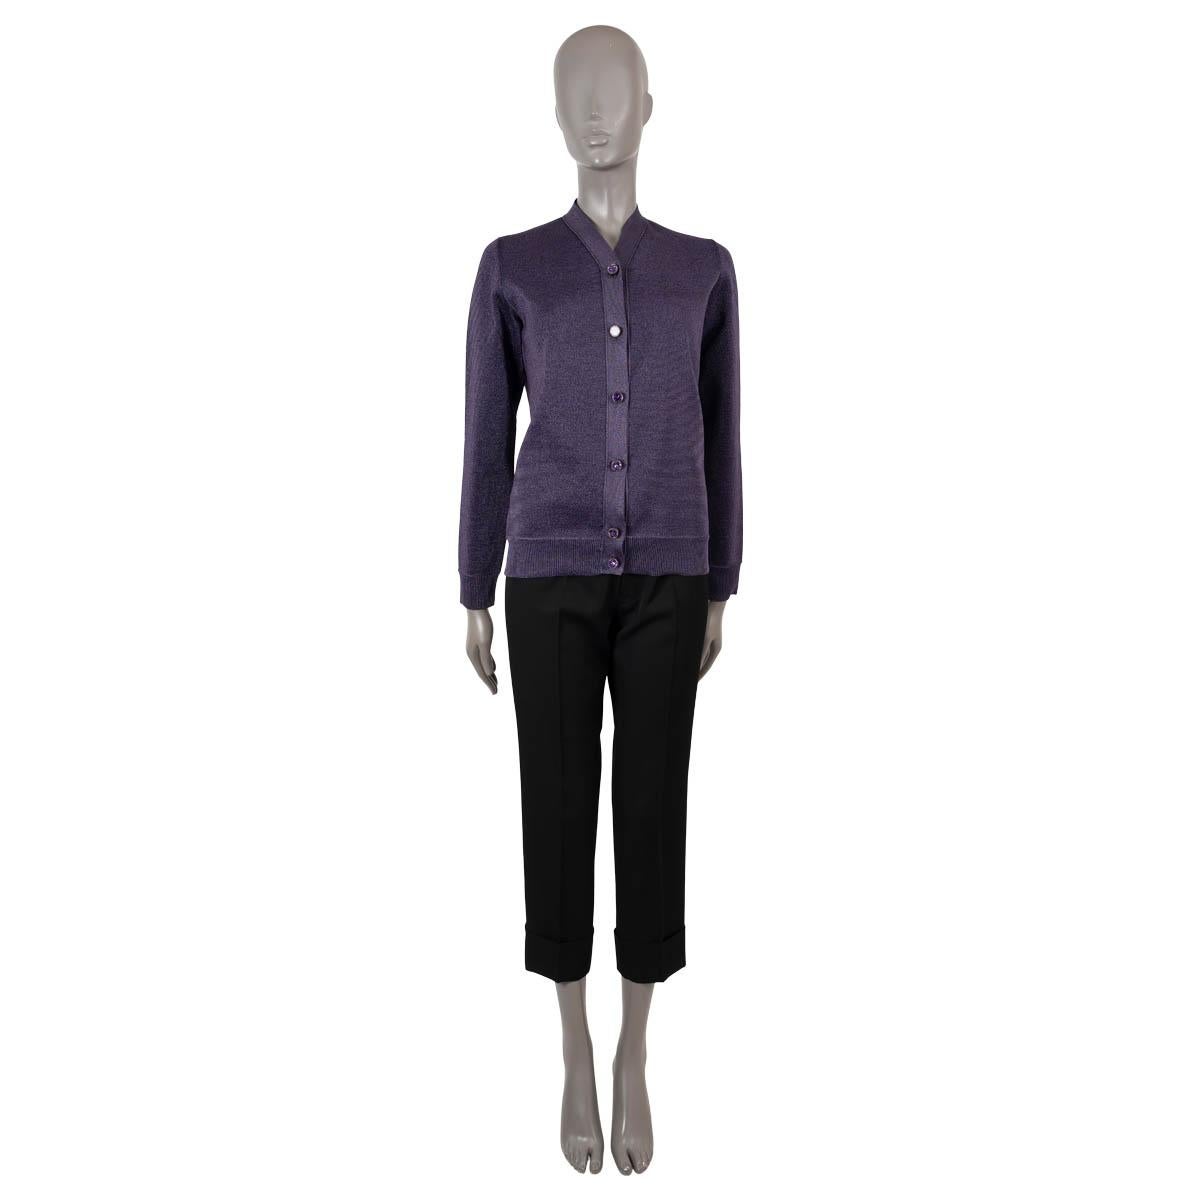 100% authentic Louis Vuitton button V-neck cardigan in metallic purple polyester (60%) andmerino wool (40%). Features rib knit cuffs and hem and decorated buttons on the front. Unlined. Has been worn and is in excellent condition.

Measurements
Tag